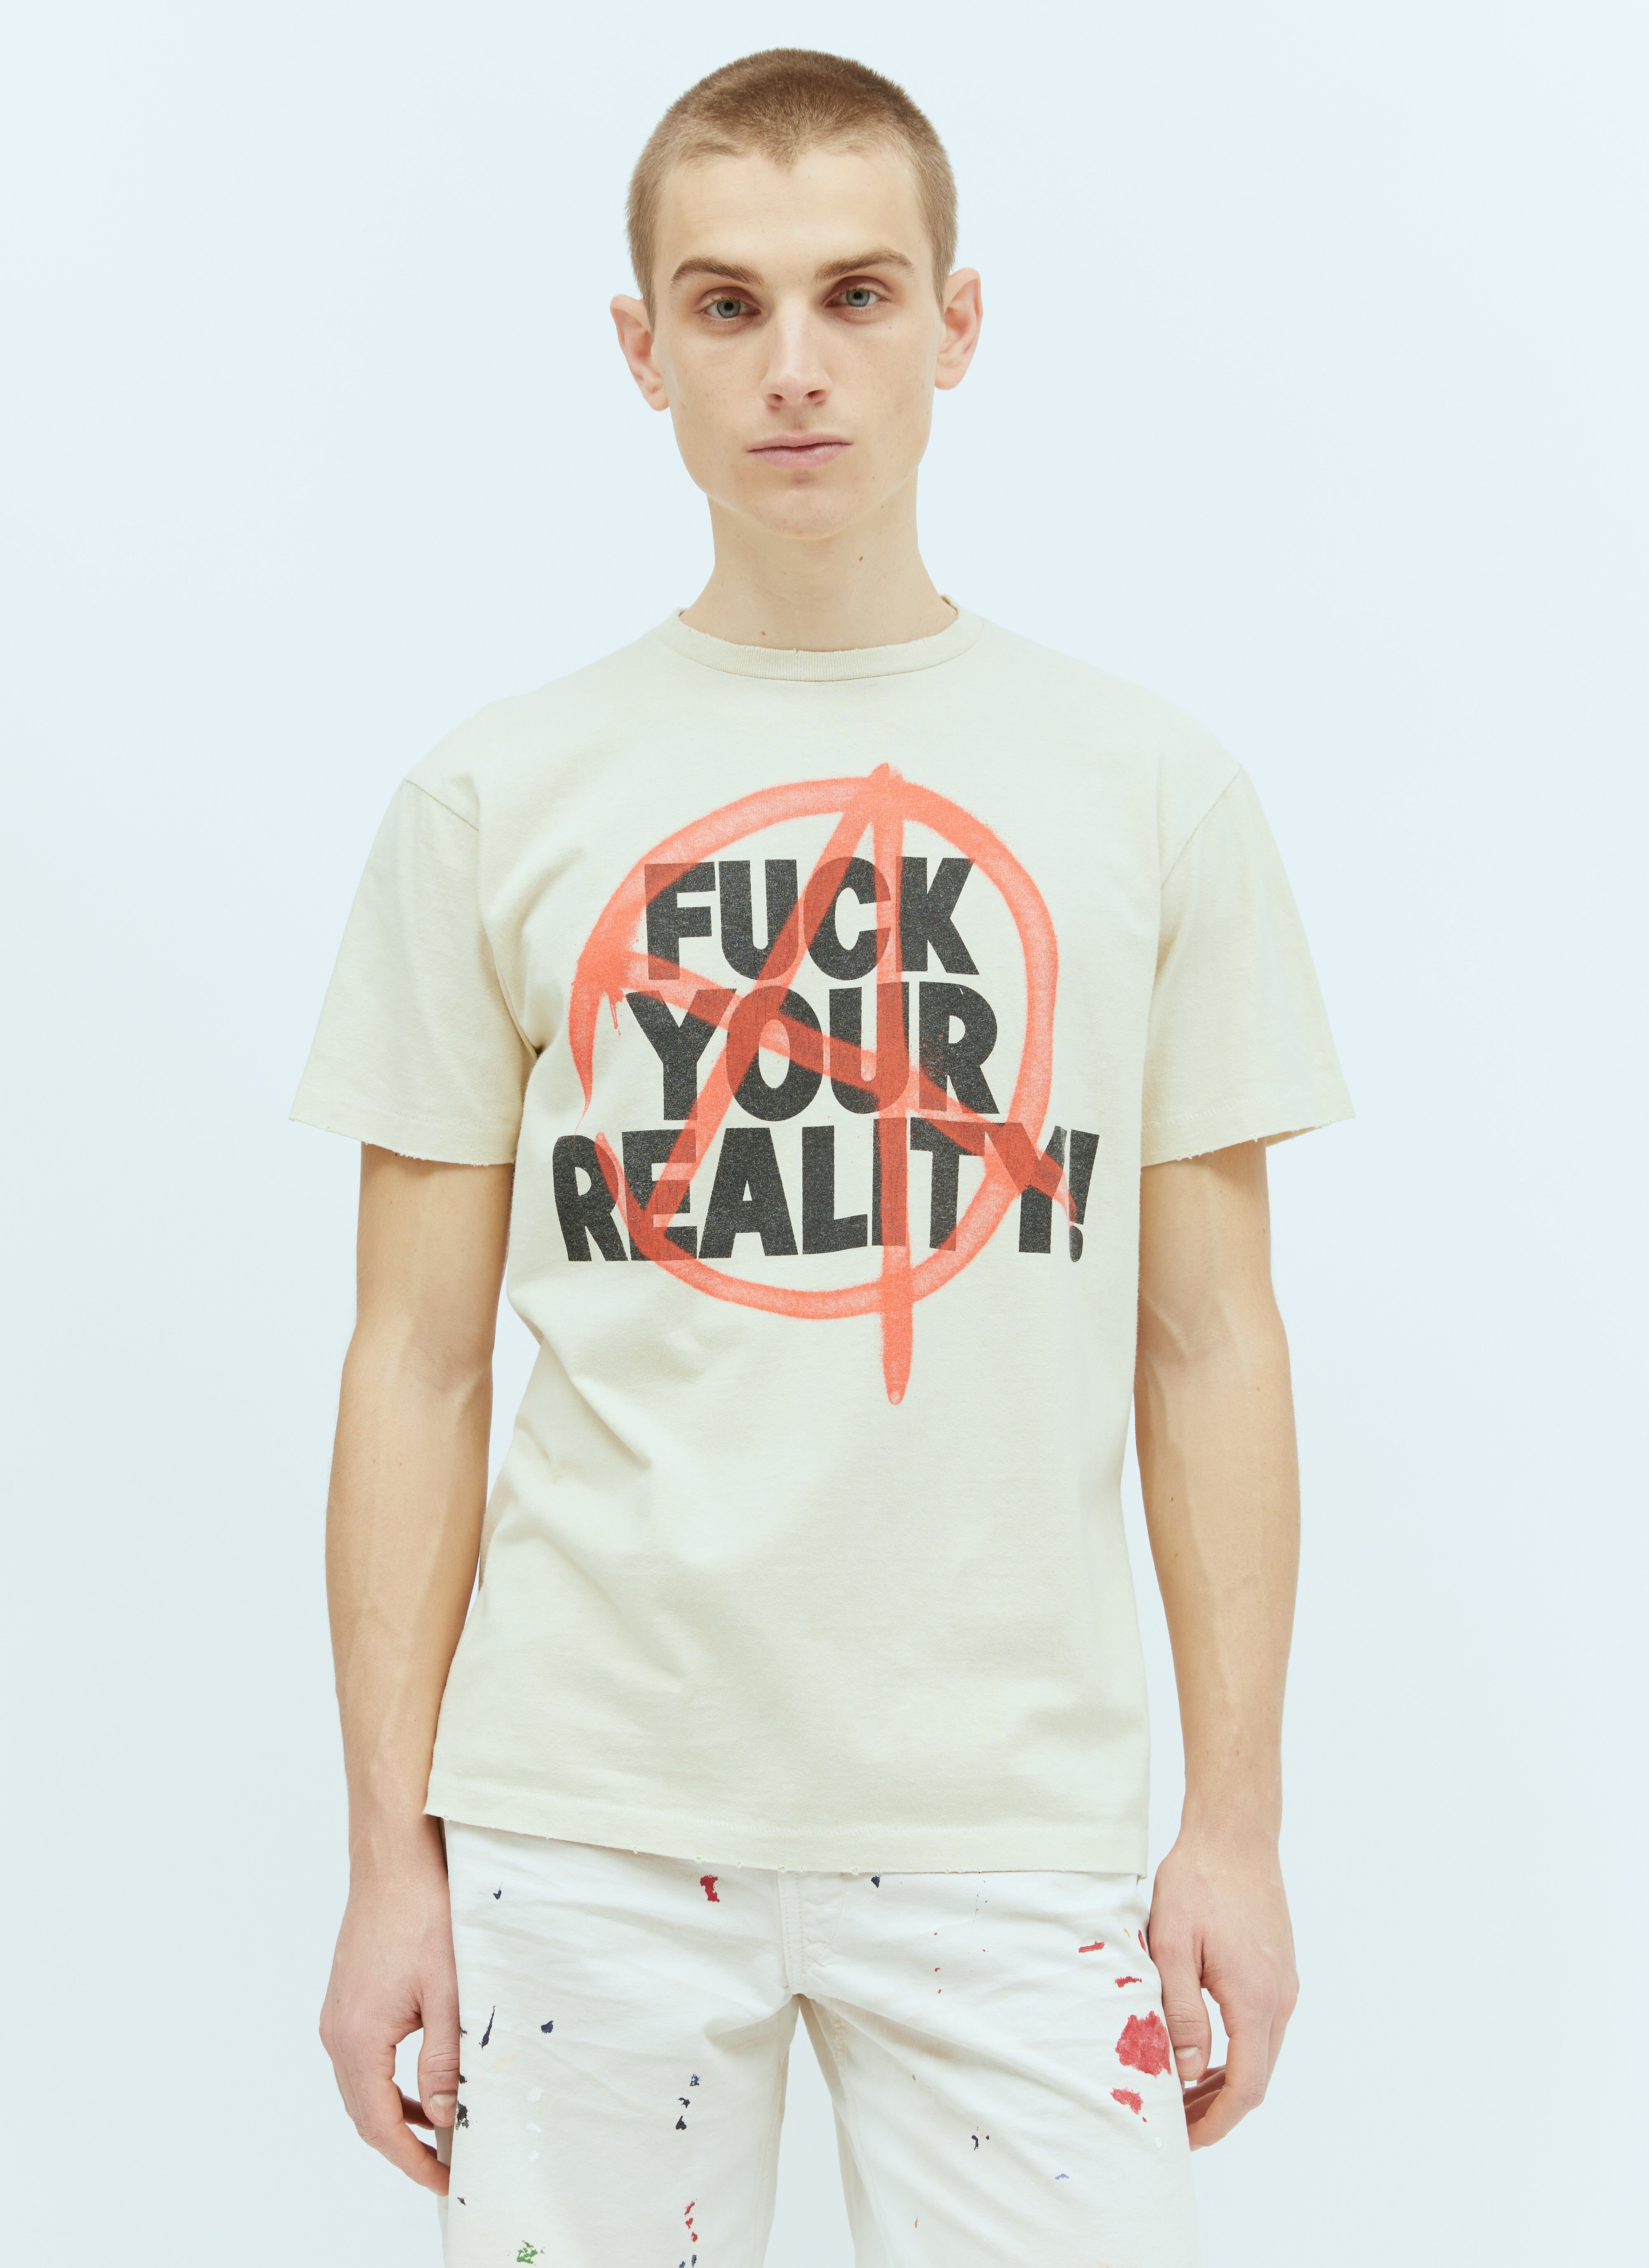 Gallery Dept. Fuck Your Reality Tシャツ ベージュ gdp0153020